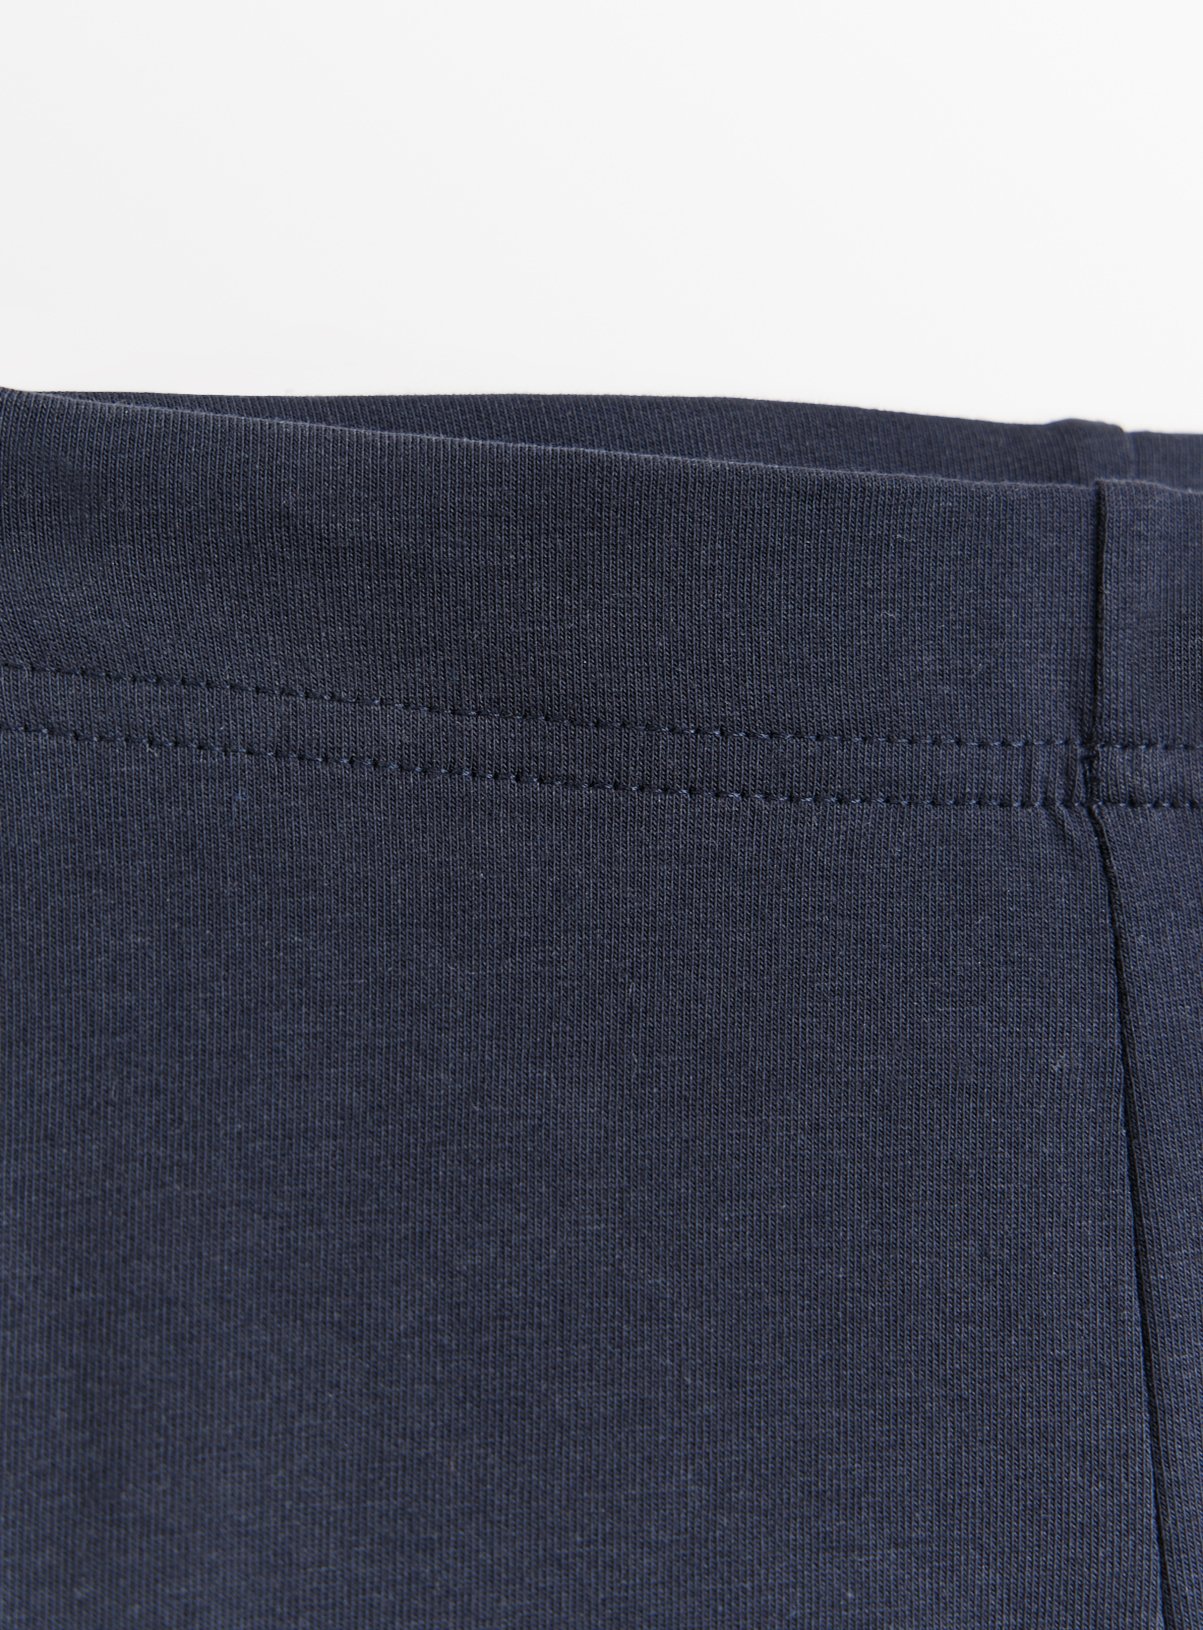 Navy Cycle Shorts 2 Pack Review